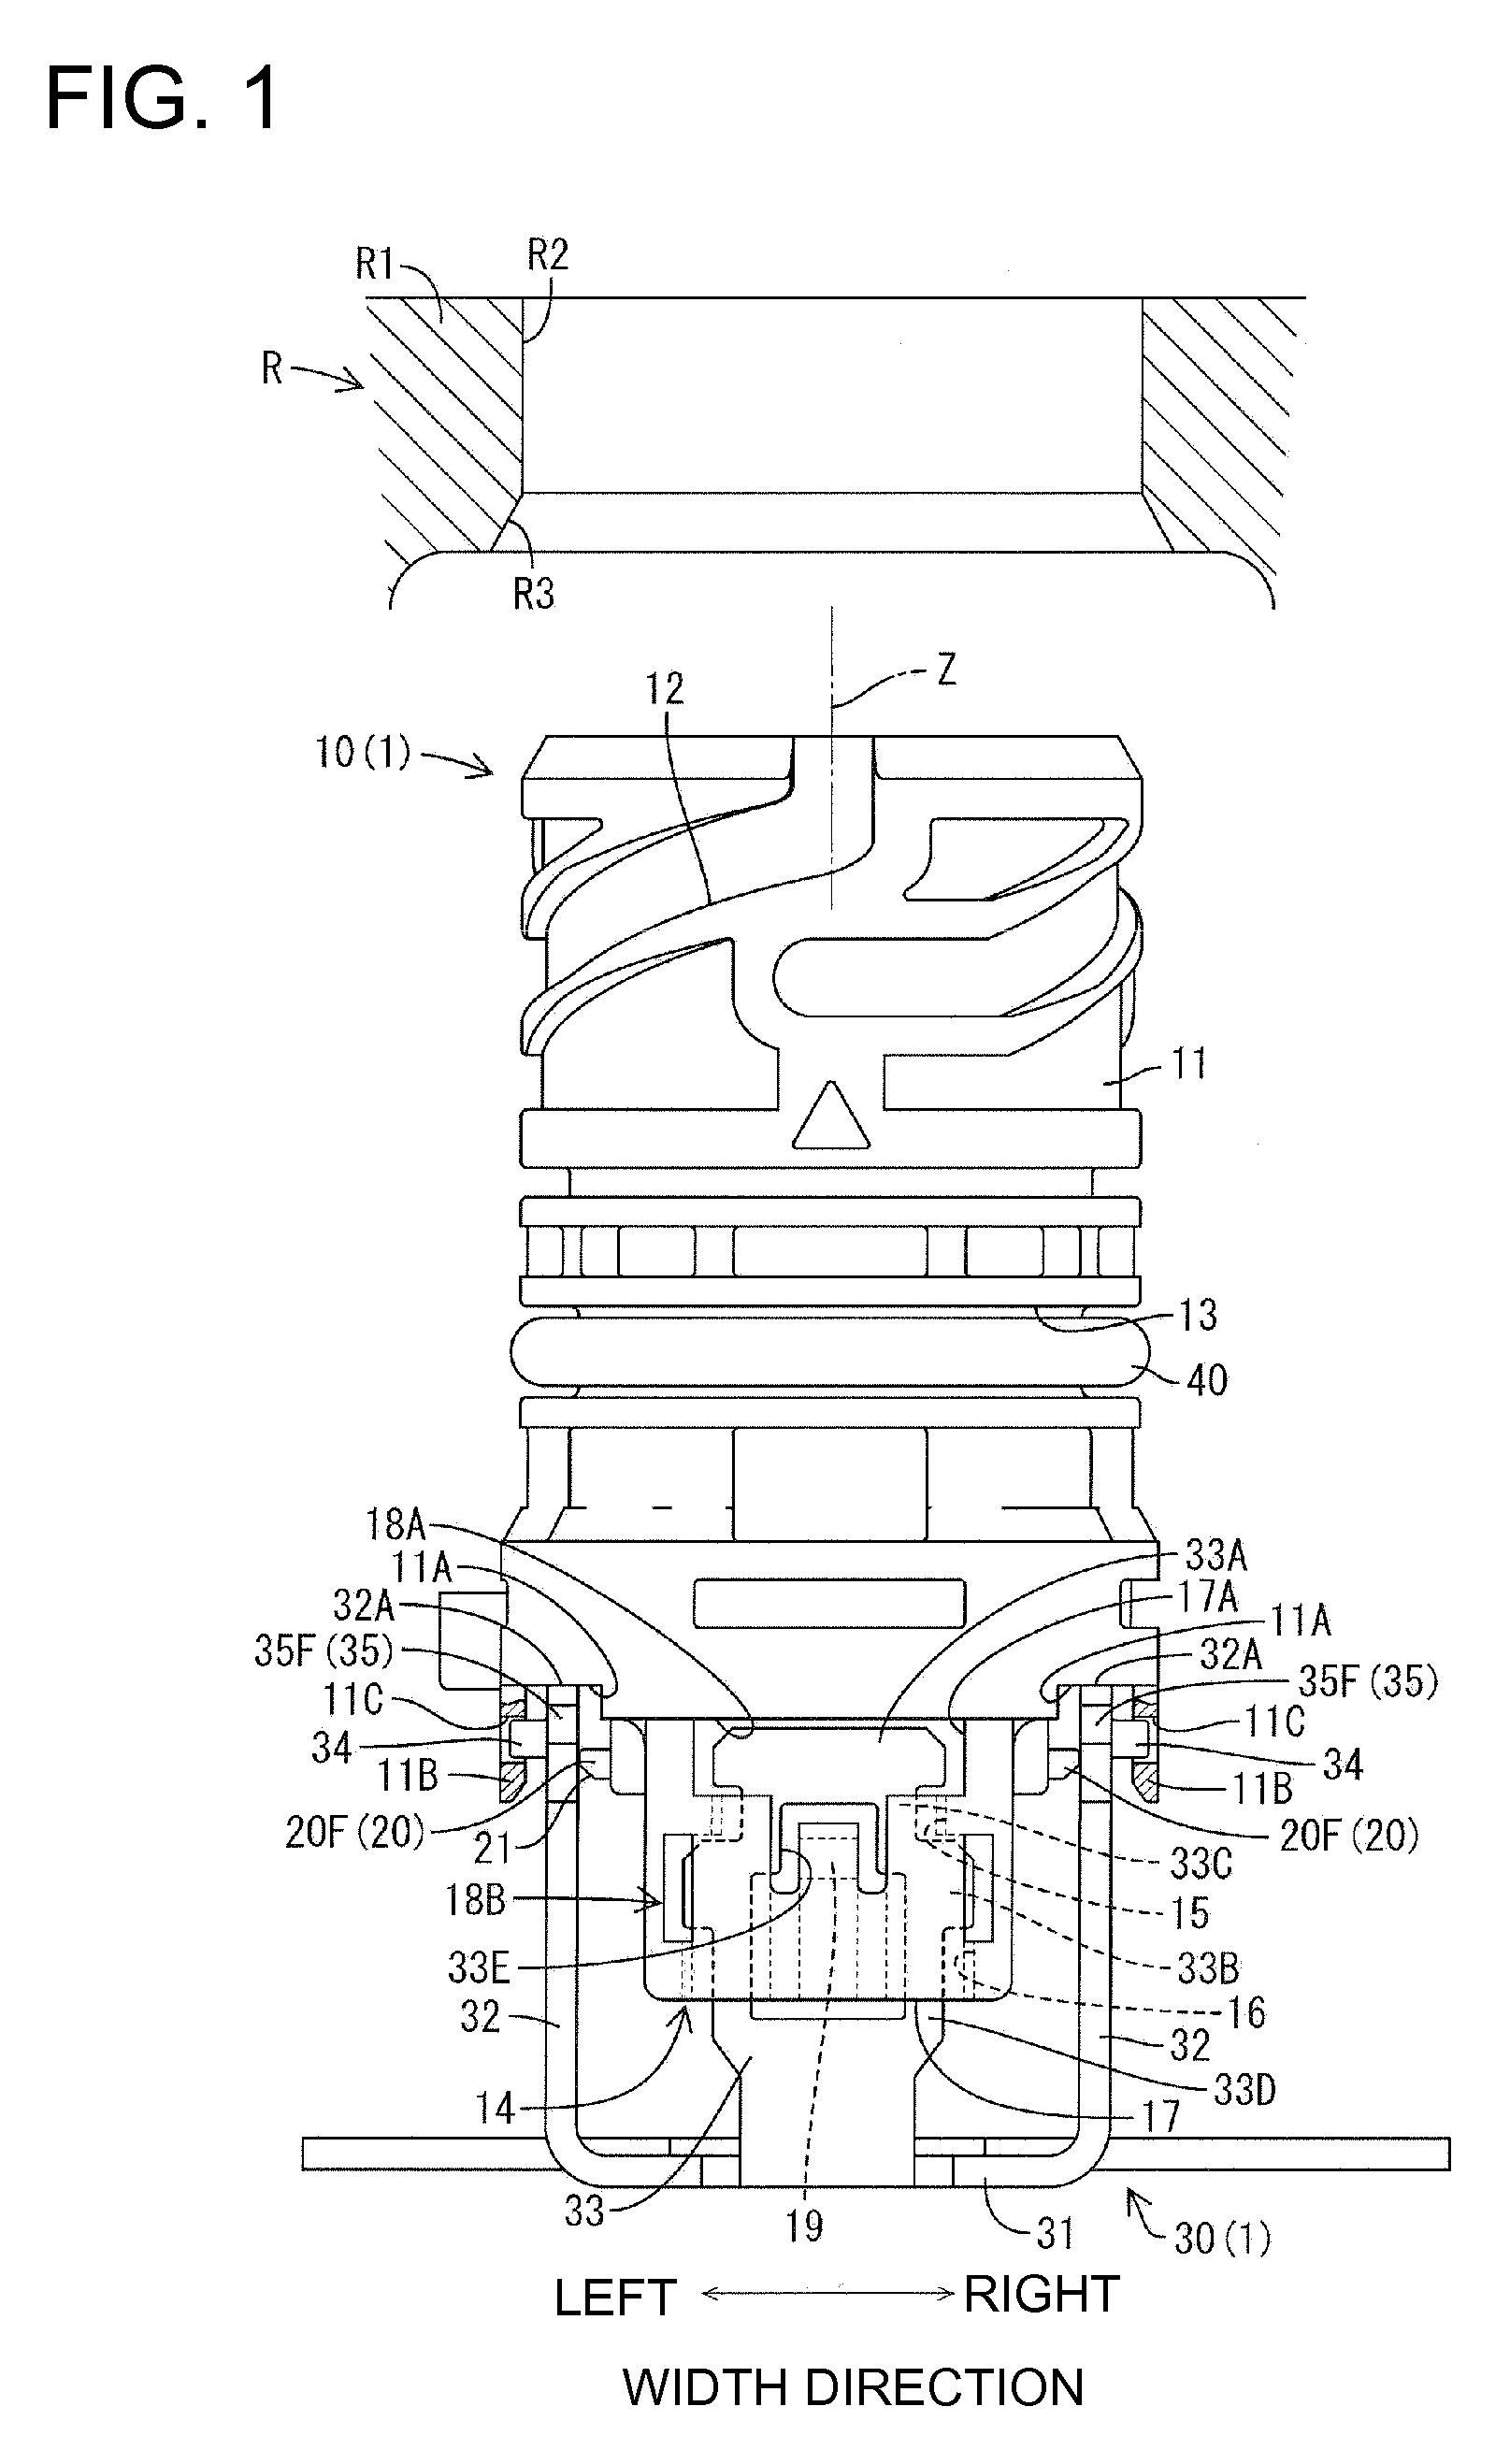 Connector mounting structure